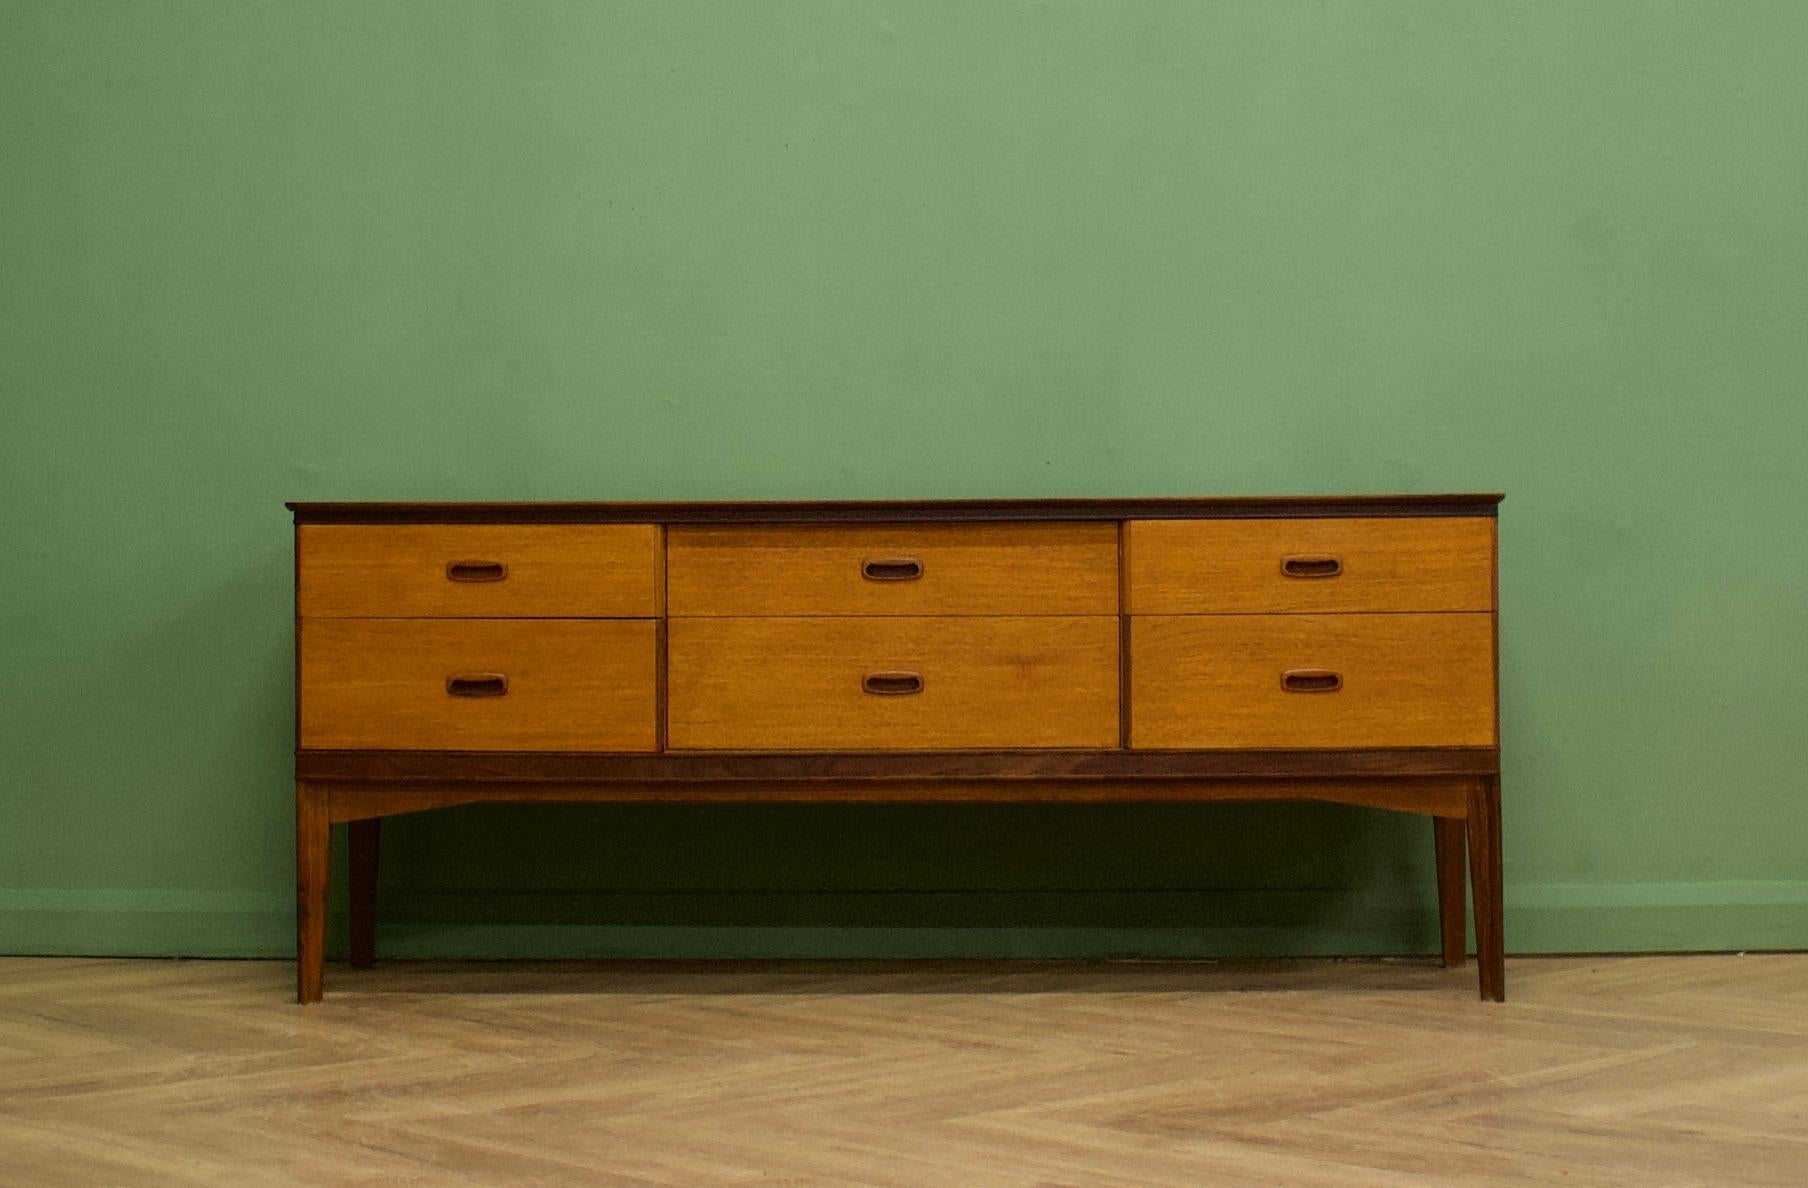 A teak long and low chest of drawers or compact sideboard from Austinsuite London- Circa 1960s

Designed by Frank Guille

It features six drawers

The piece stands on delicate tapered legs and each drawer has solid teak recessed handles